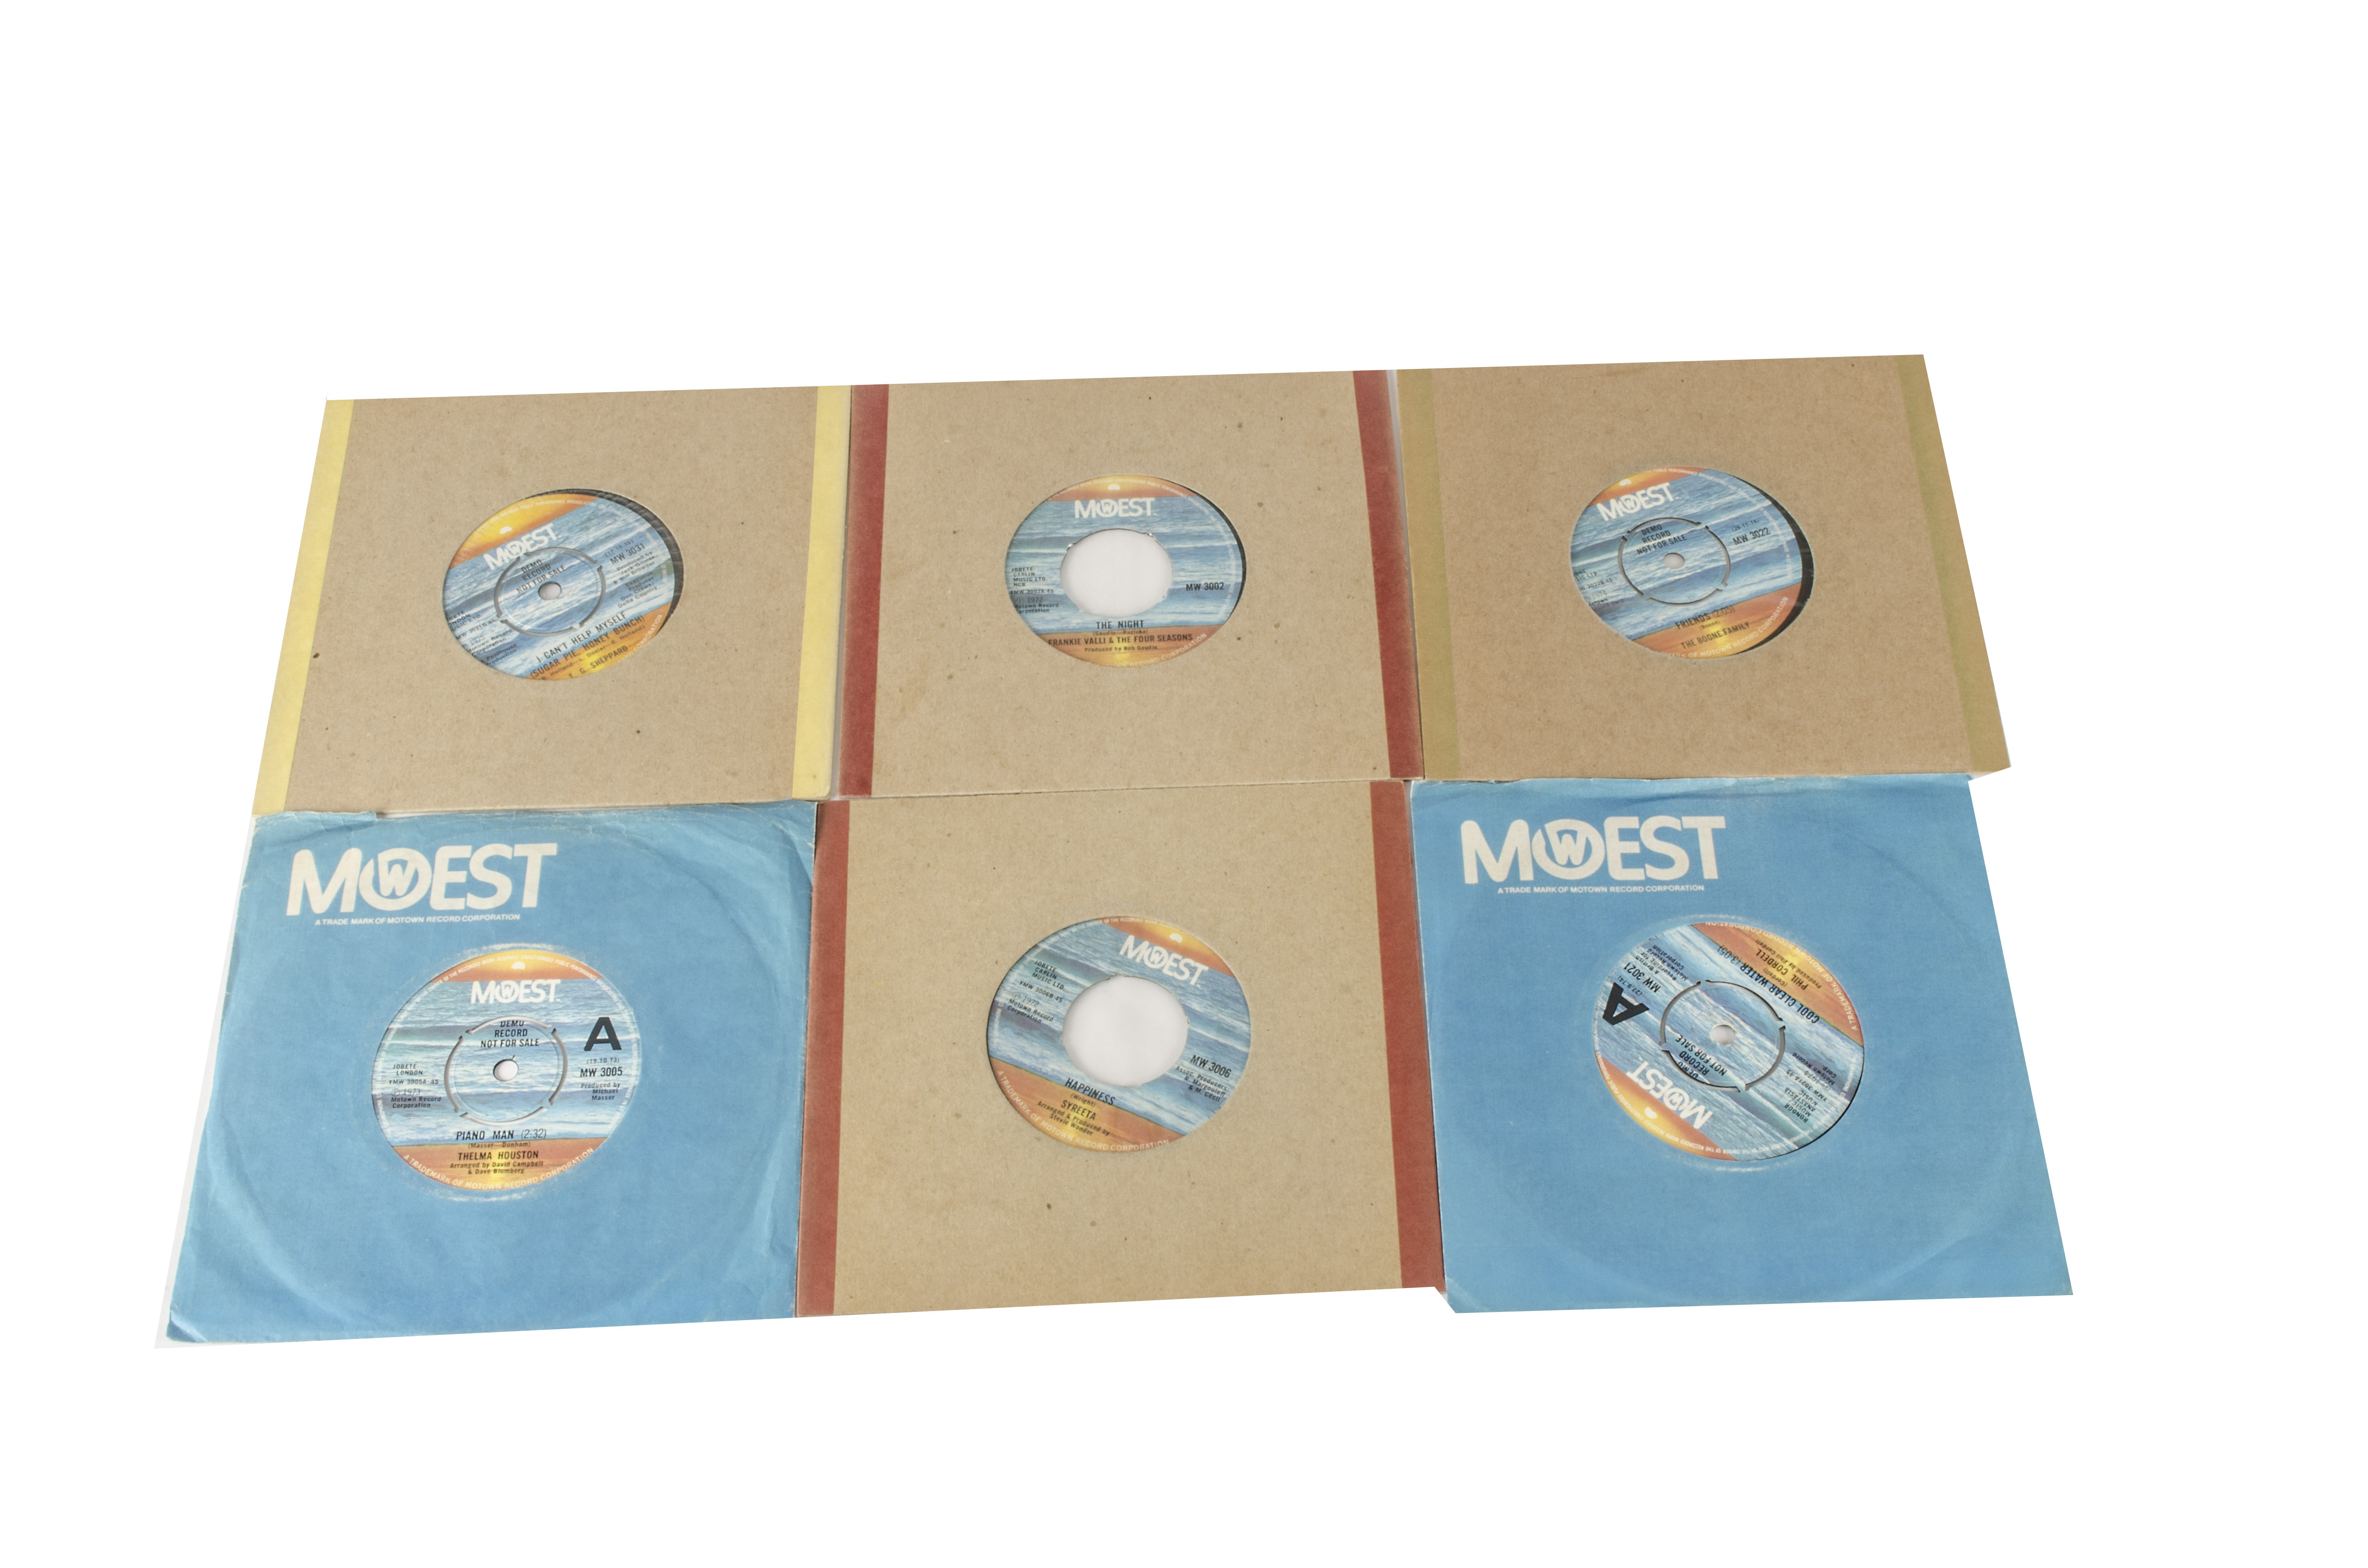 Soul / Mowest Label, ten UK 7" Singles on the Mowest label including Demos - Artists include Frankie